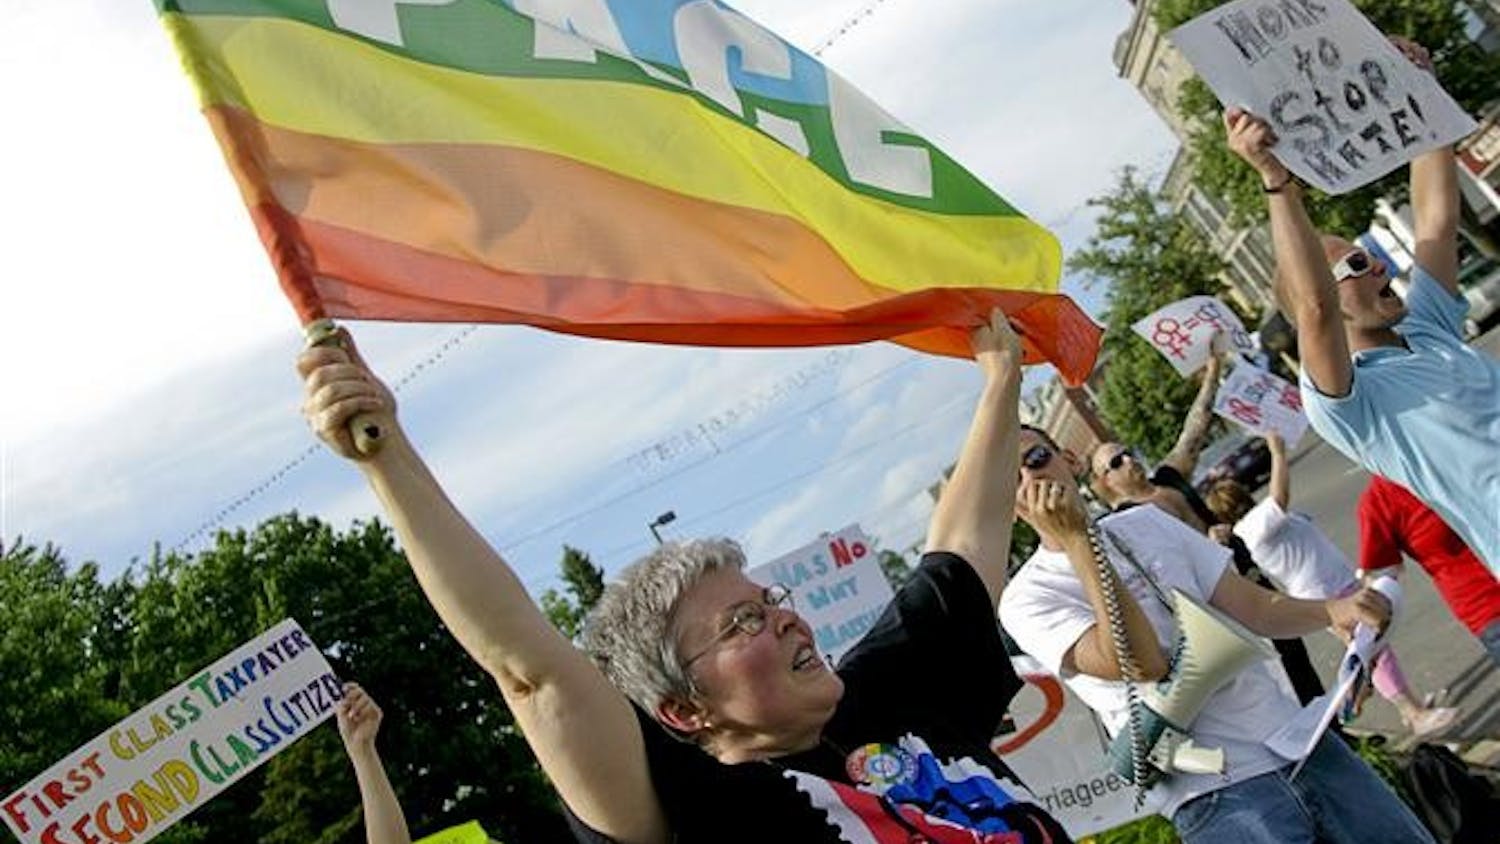 Bloomington resident Linda Zambanini waves a flag Tuesday afternoon outside the Monroe County Courthouse. Protestors gathered to speak against the recent decision of the courts in California to uphold Proposition 8, banning same-sex marriages, but allowing the 18,000 marriages that occured prior to Prop 8's passing to be legally recognized.